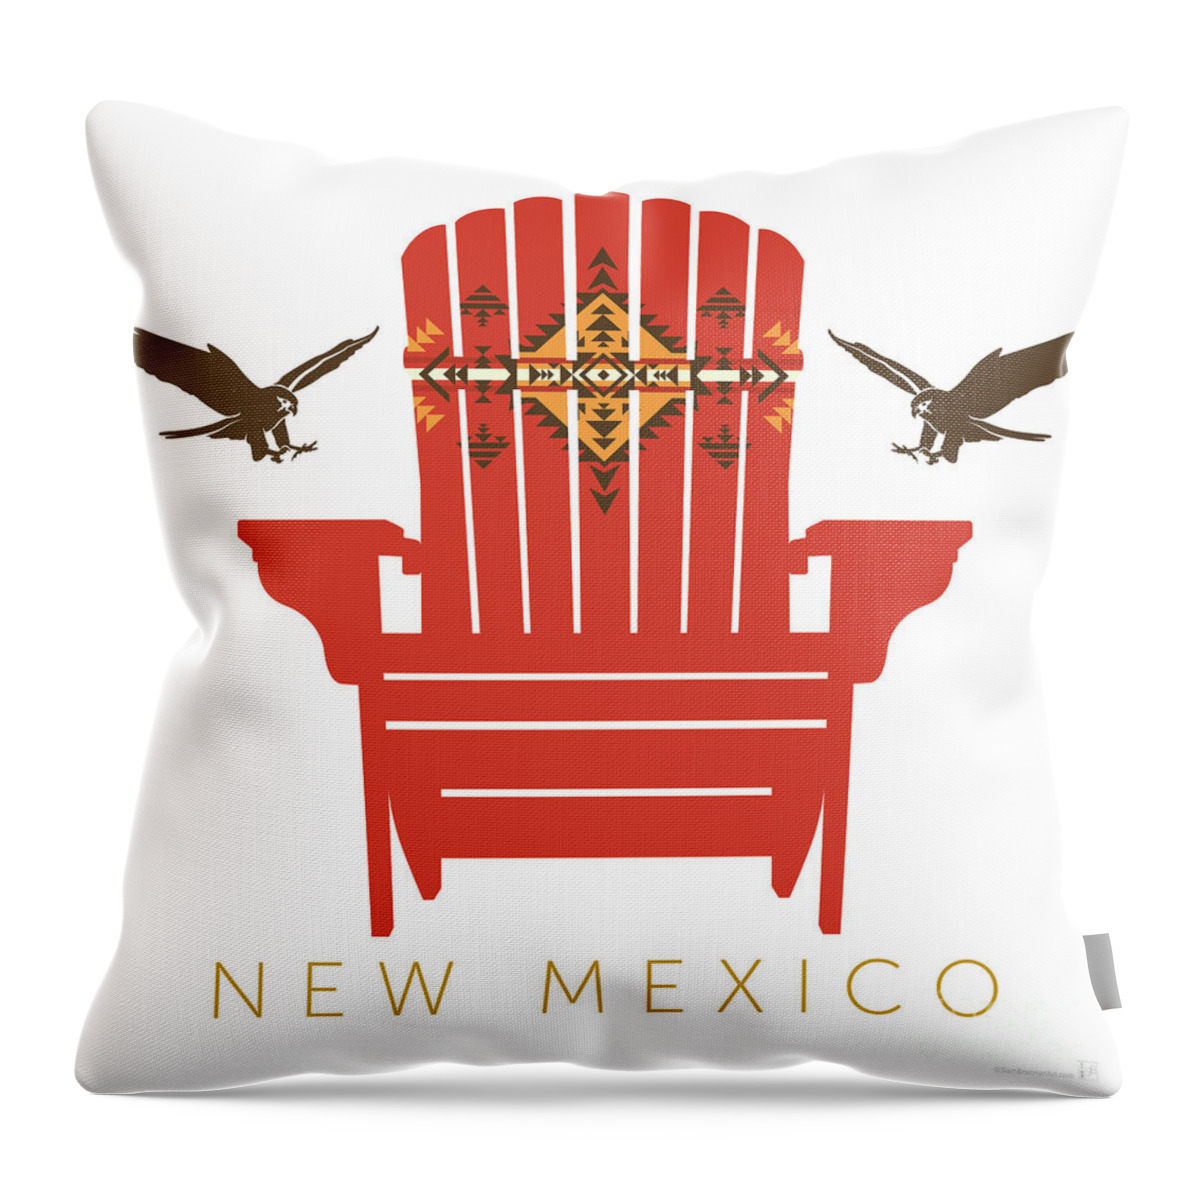 New Mexico Throw Pillow featuring the digital art New Mexico by Sam Brennan